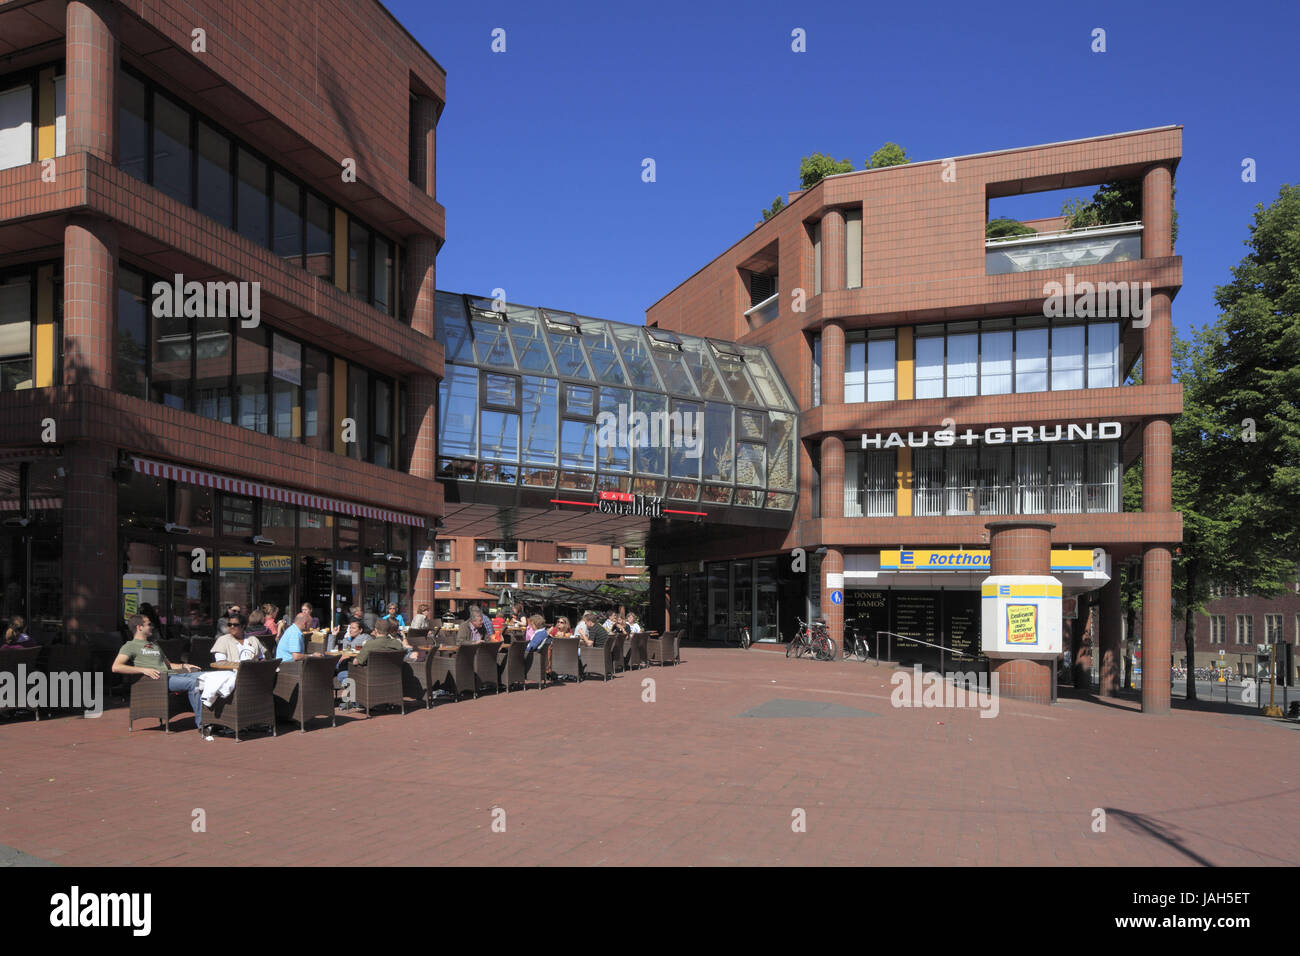 Germany,North Rhine-Westphalia,Westphalia,cathedral country,cathedral,Aegidiimarkt,office building,pedestrian area,crossing,passage,person in the street cafe, Stock Photo